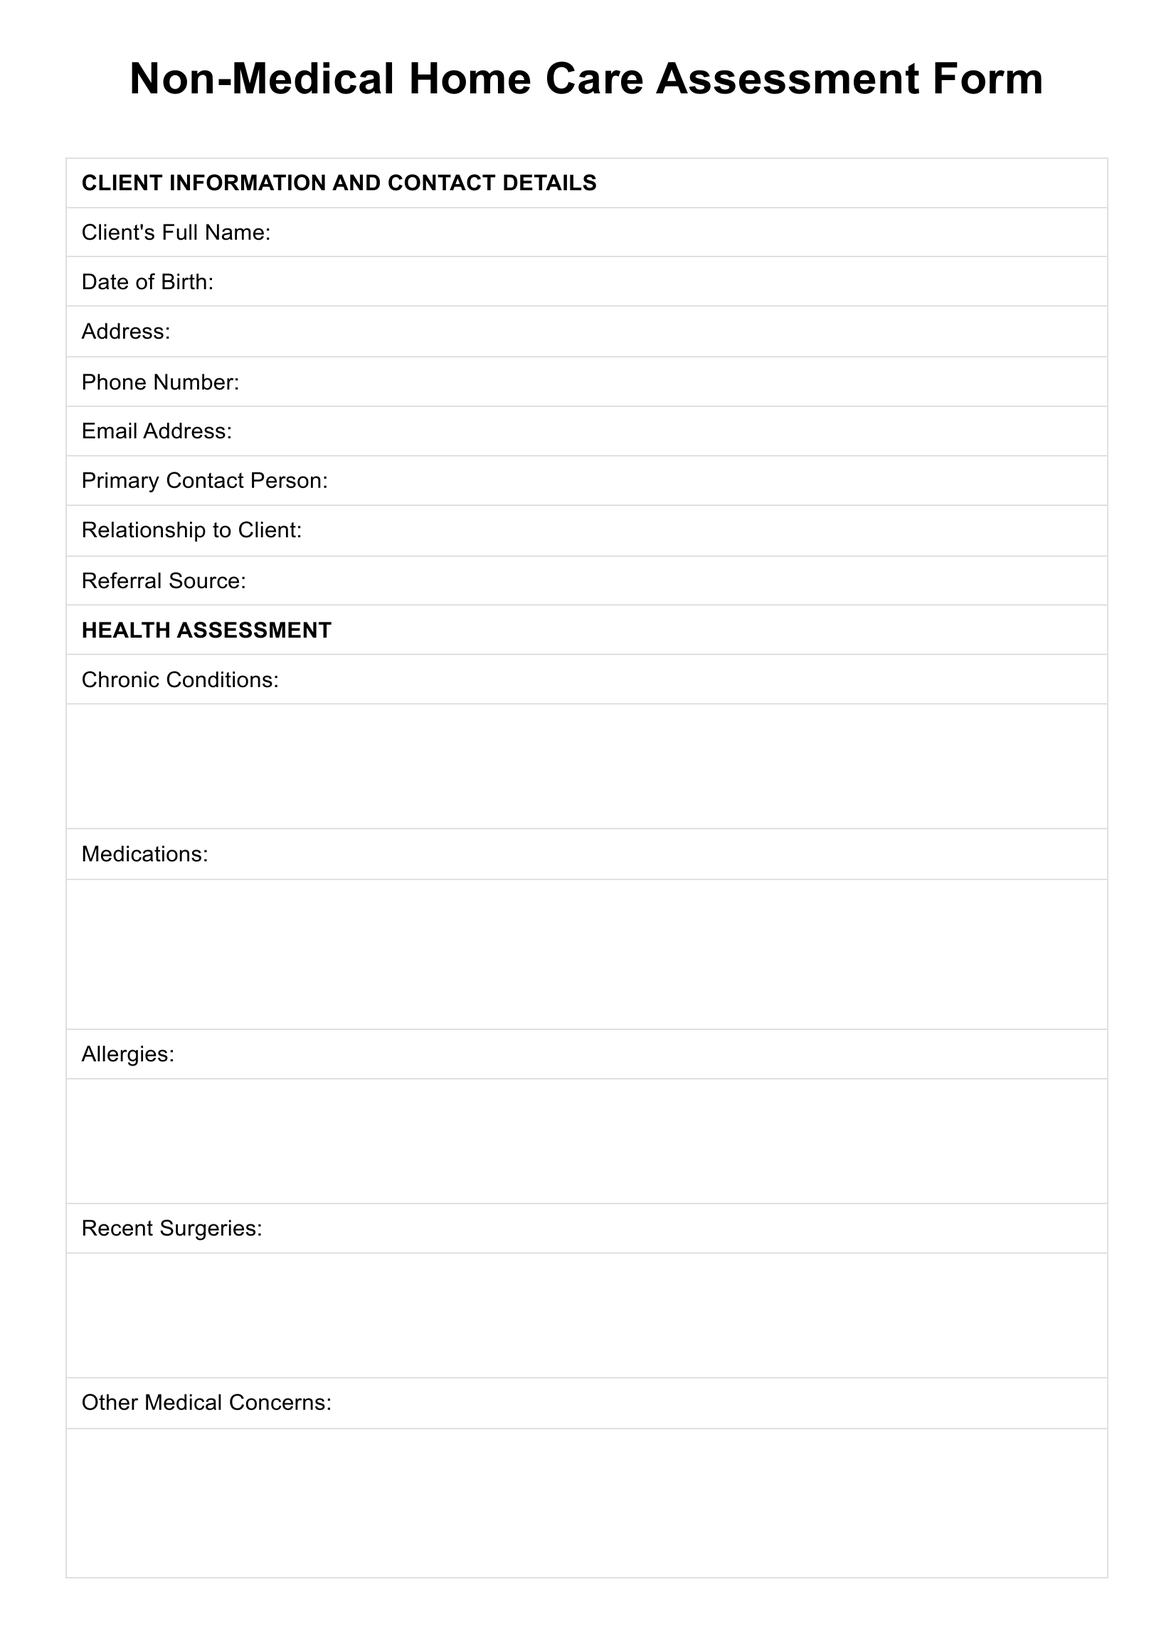 Non-Medical Home Care Assessment Form PDF PDF Example